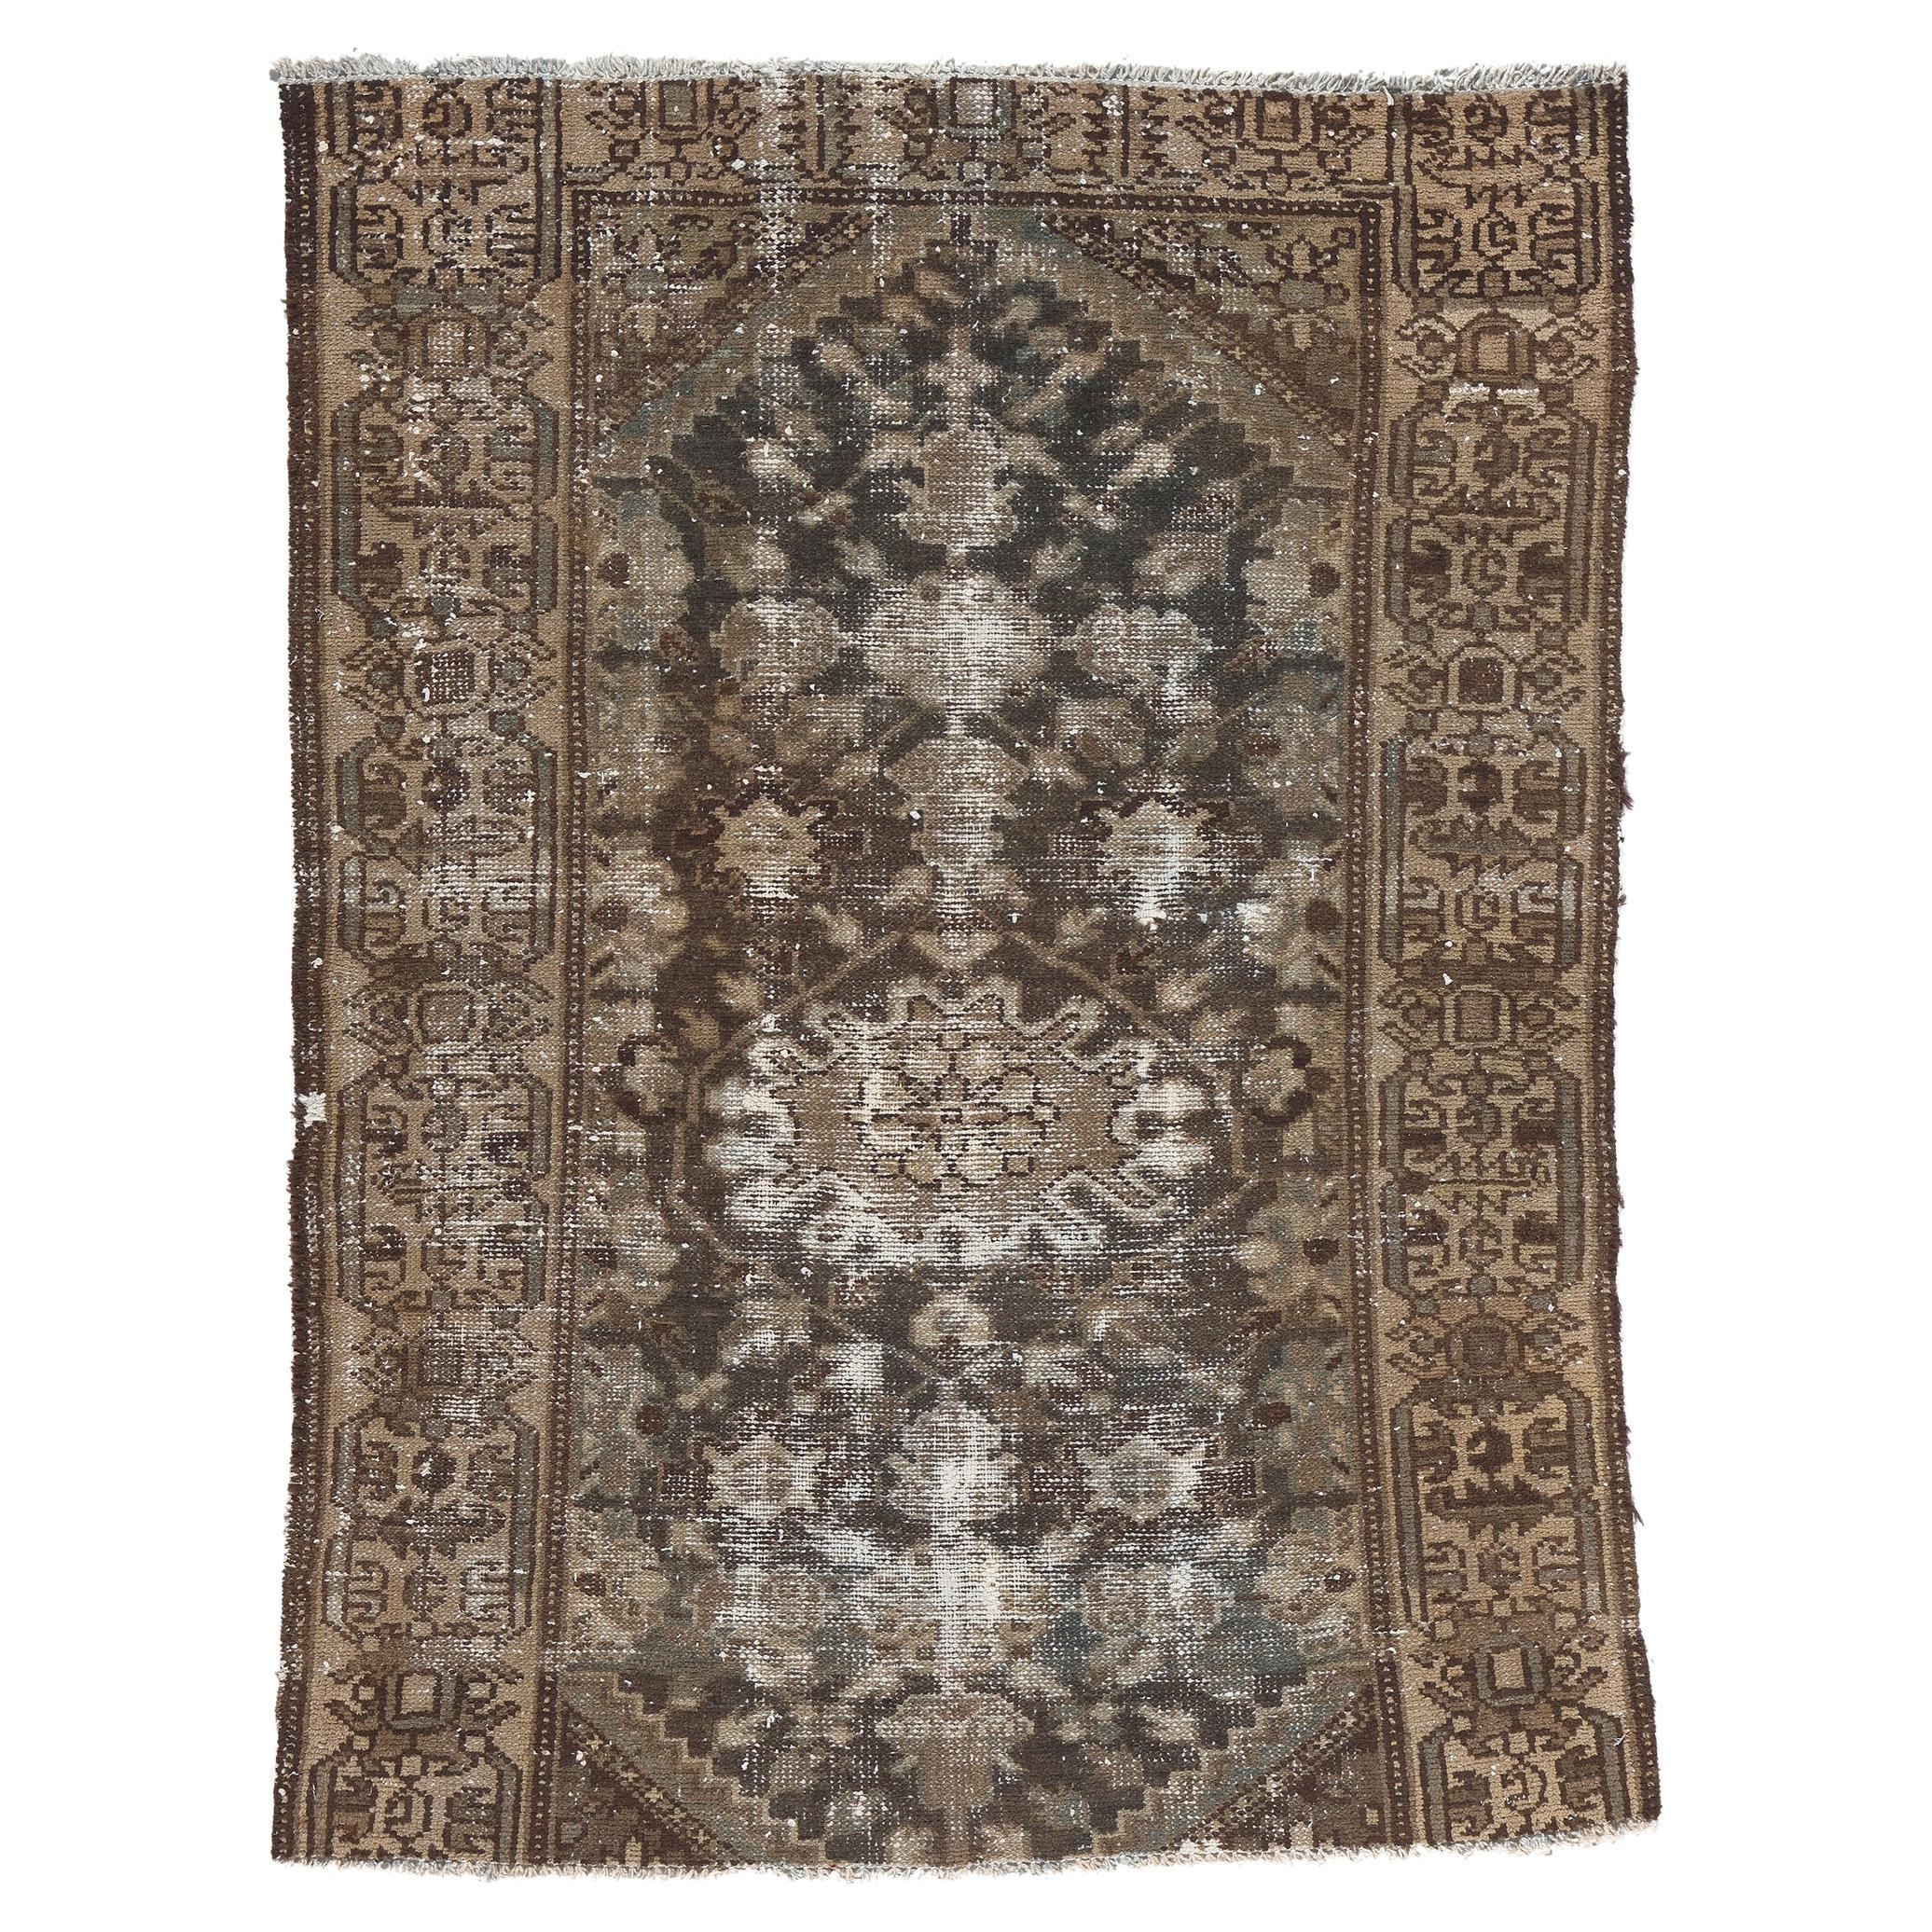 Distressed Antique Worn Persian Rug, Rustic Sensibility Meets Weathered Finesse